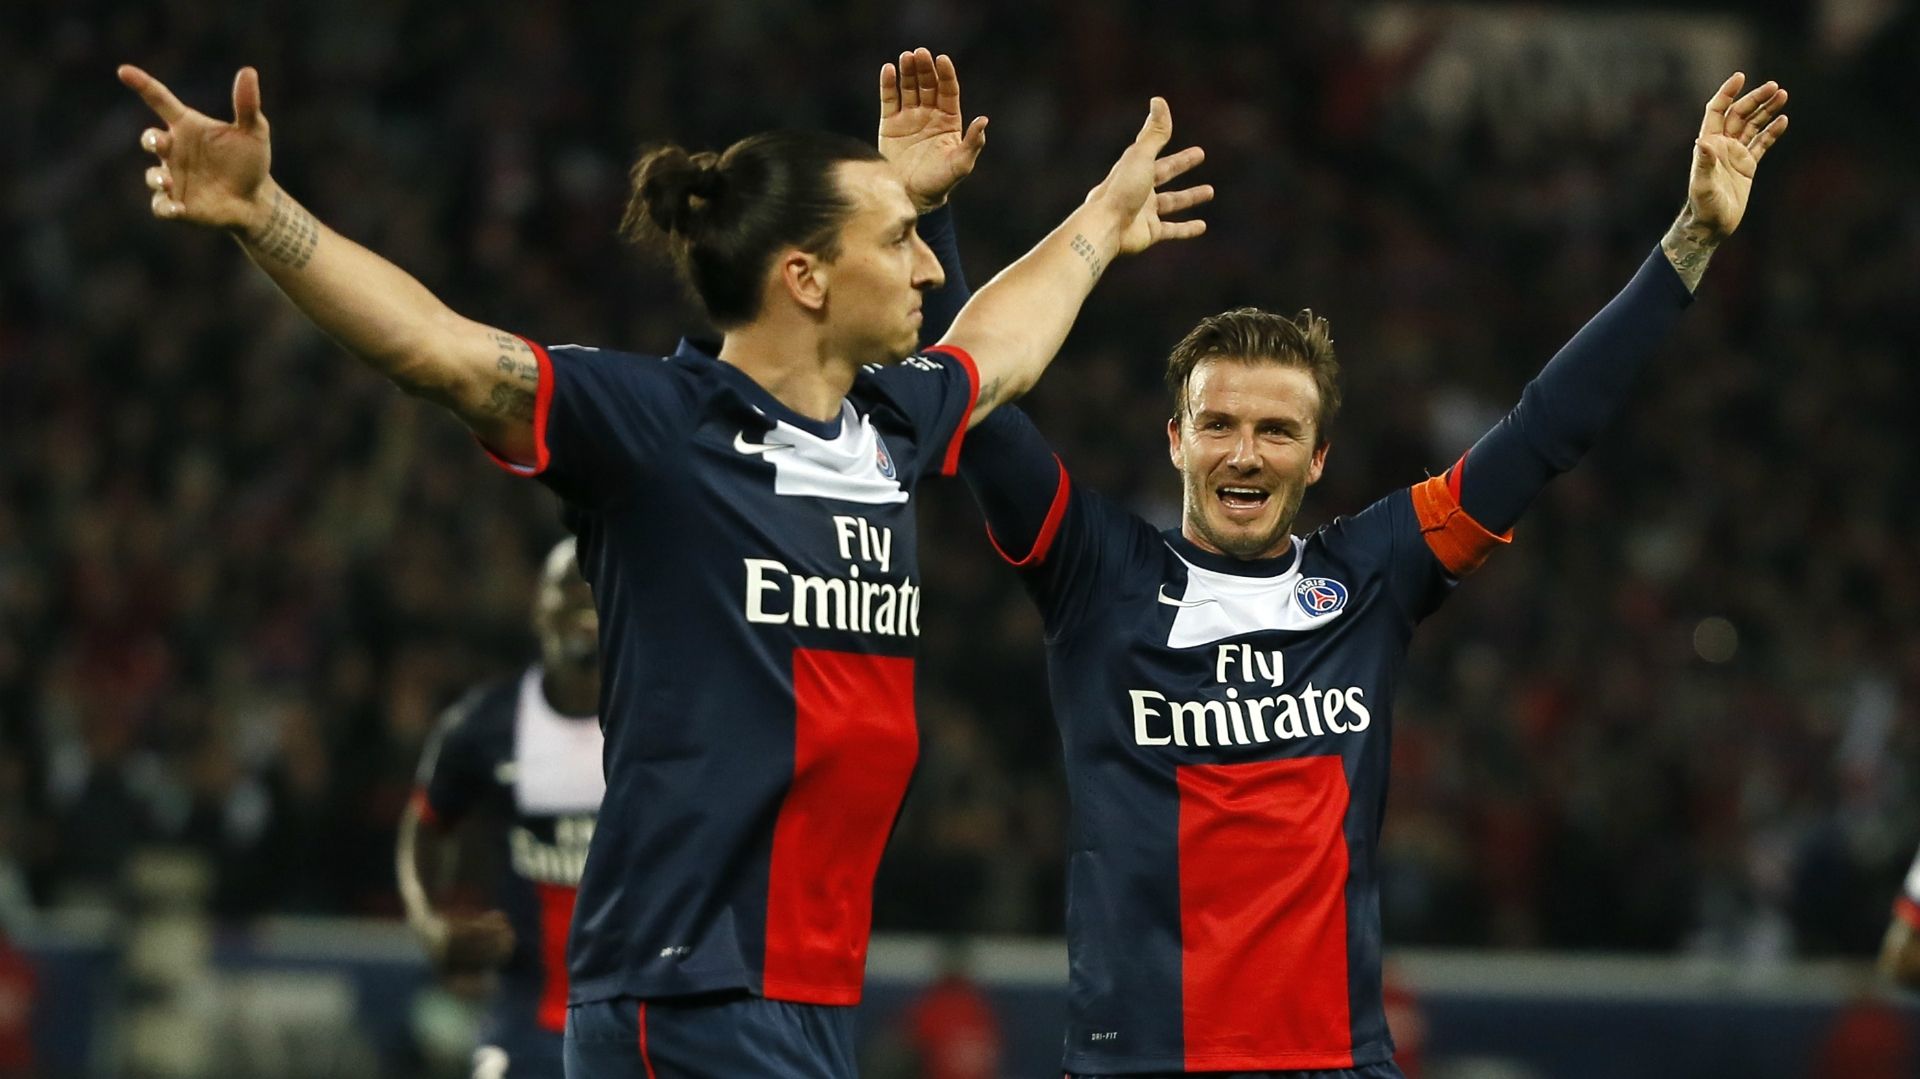 David Beckham's final club game - Who were his teammates and where